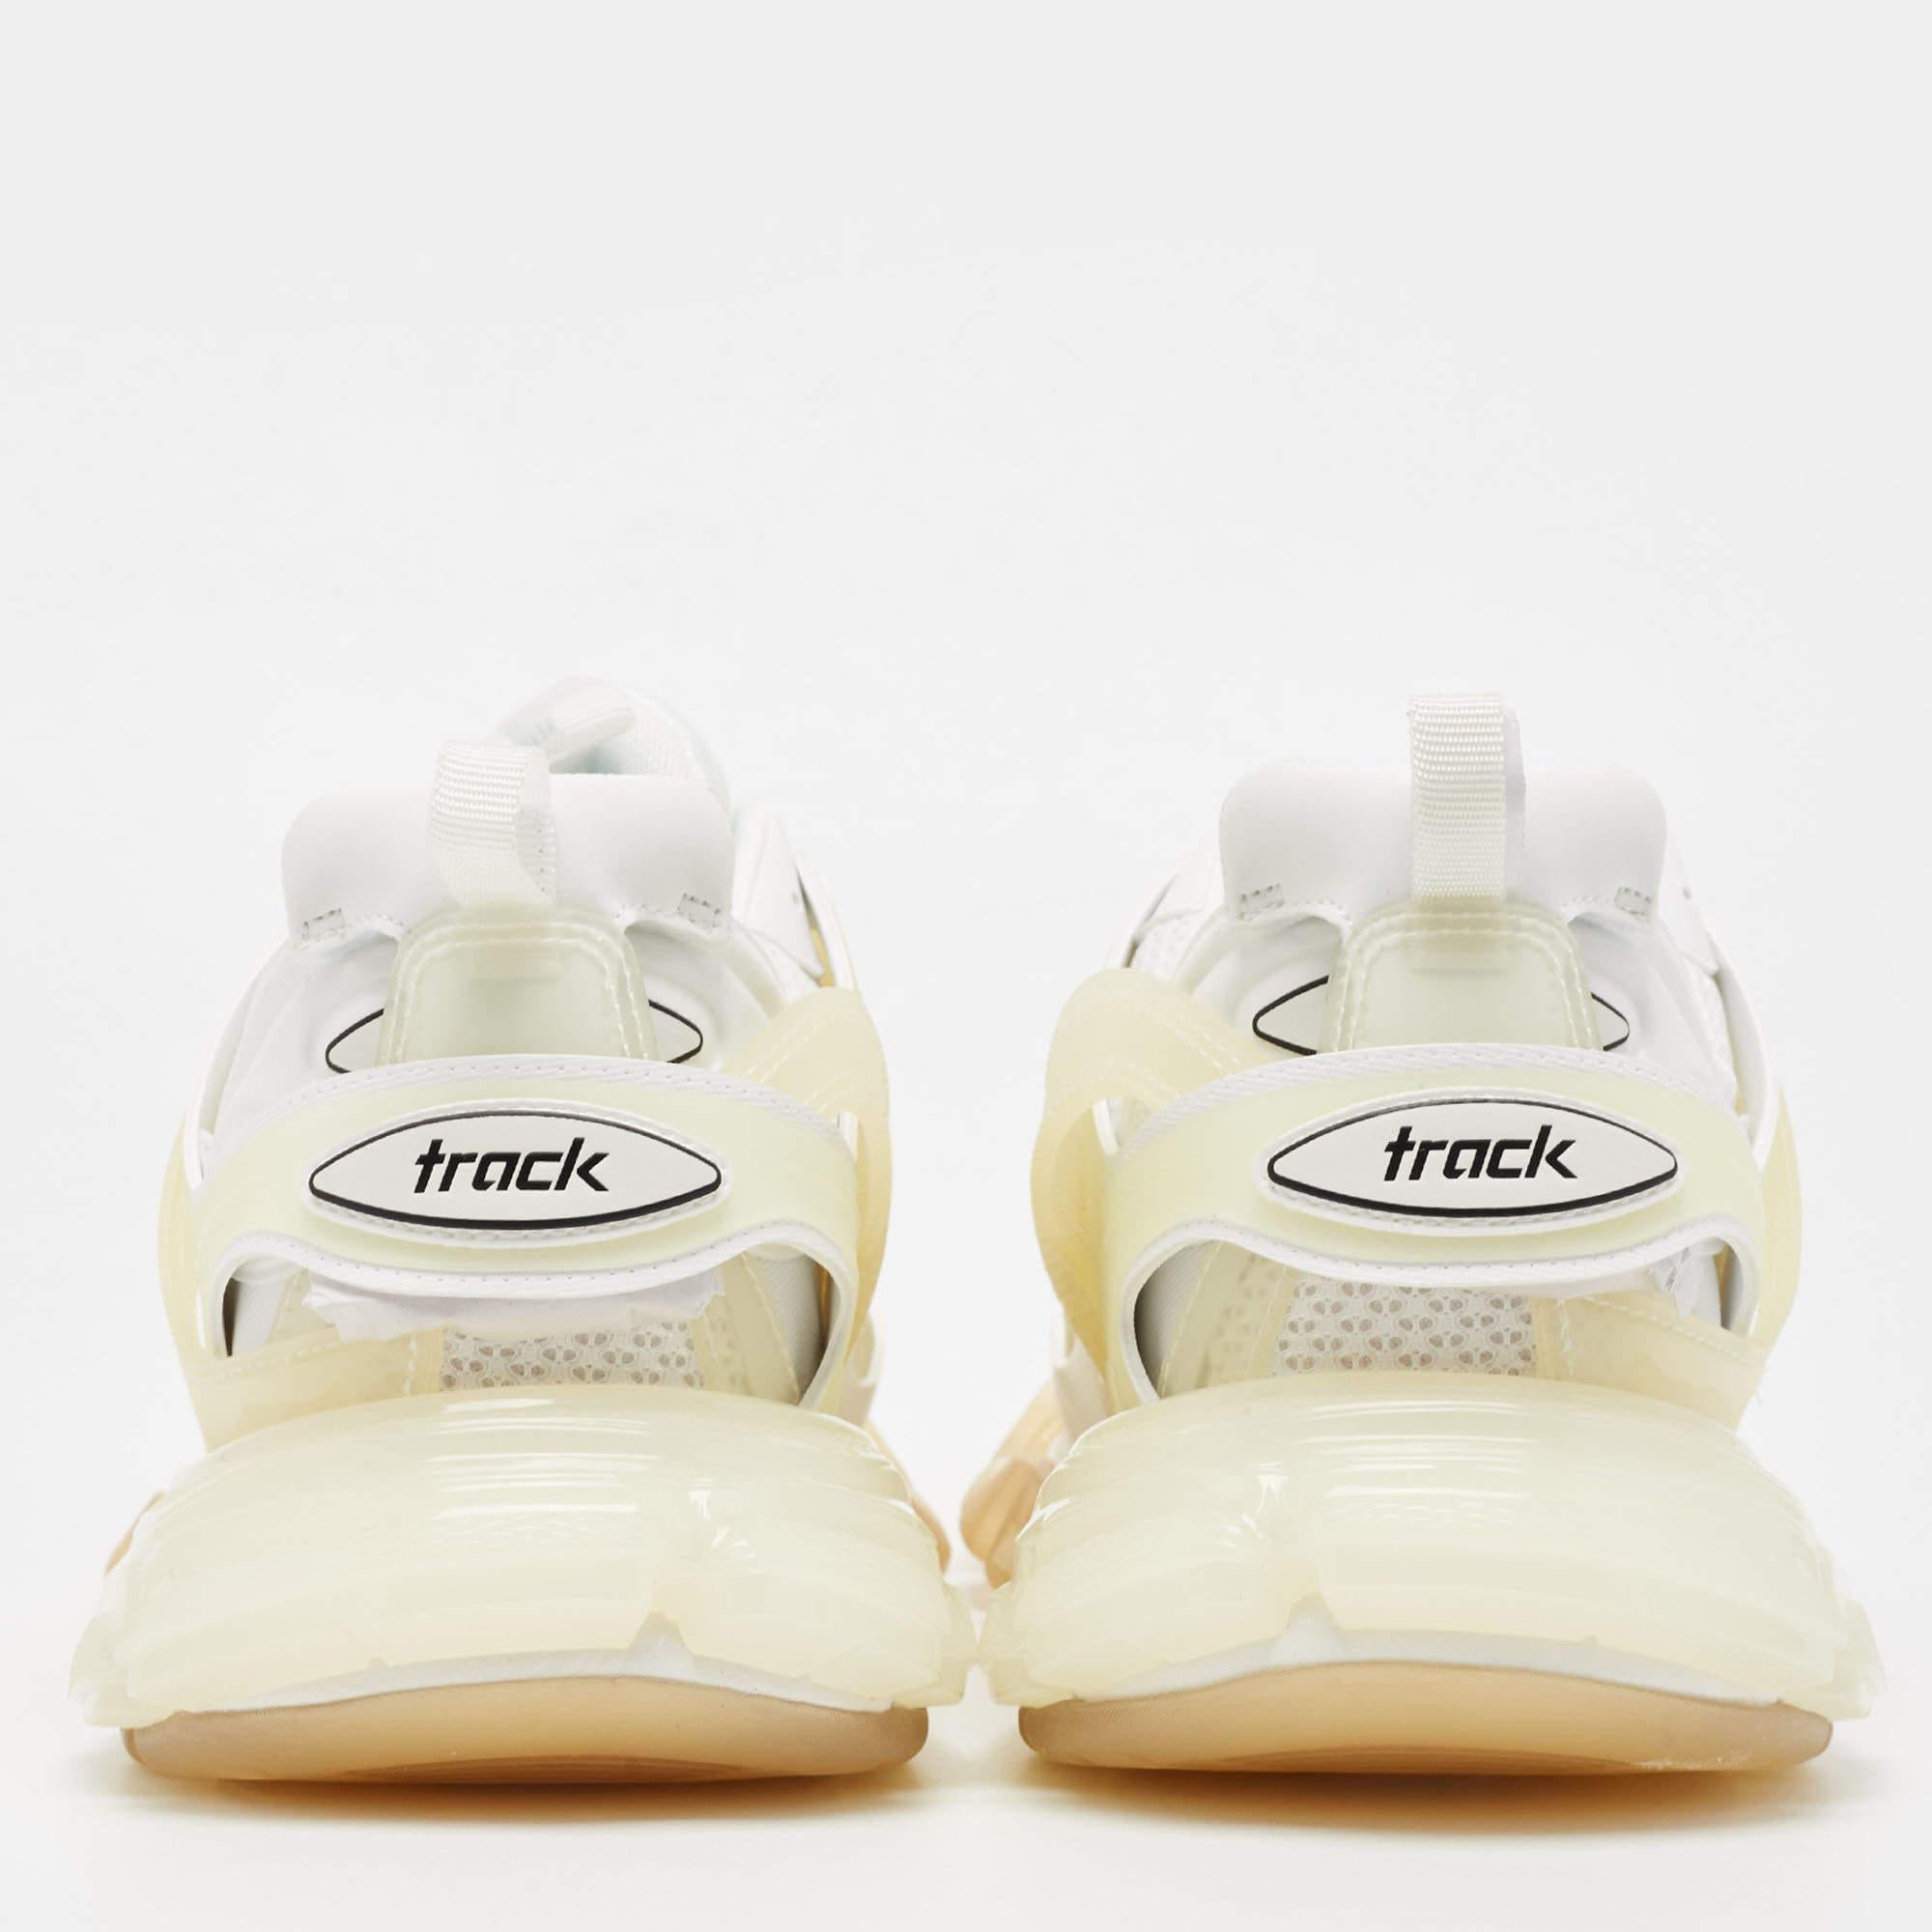 Balenciaga White/Transparent Leather and PVC Track Clear Sole Sneakers Size 44 1